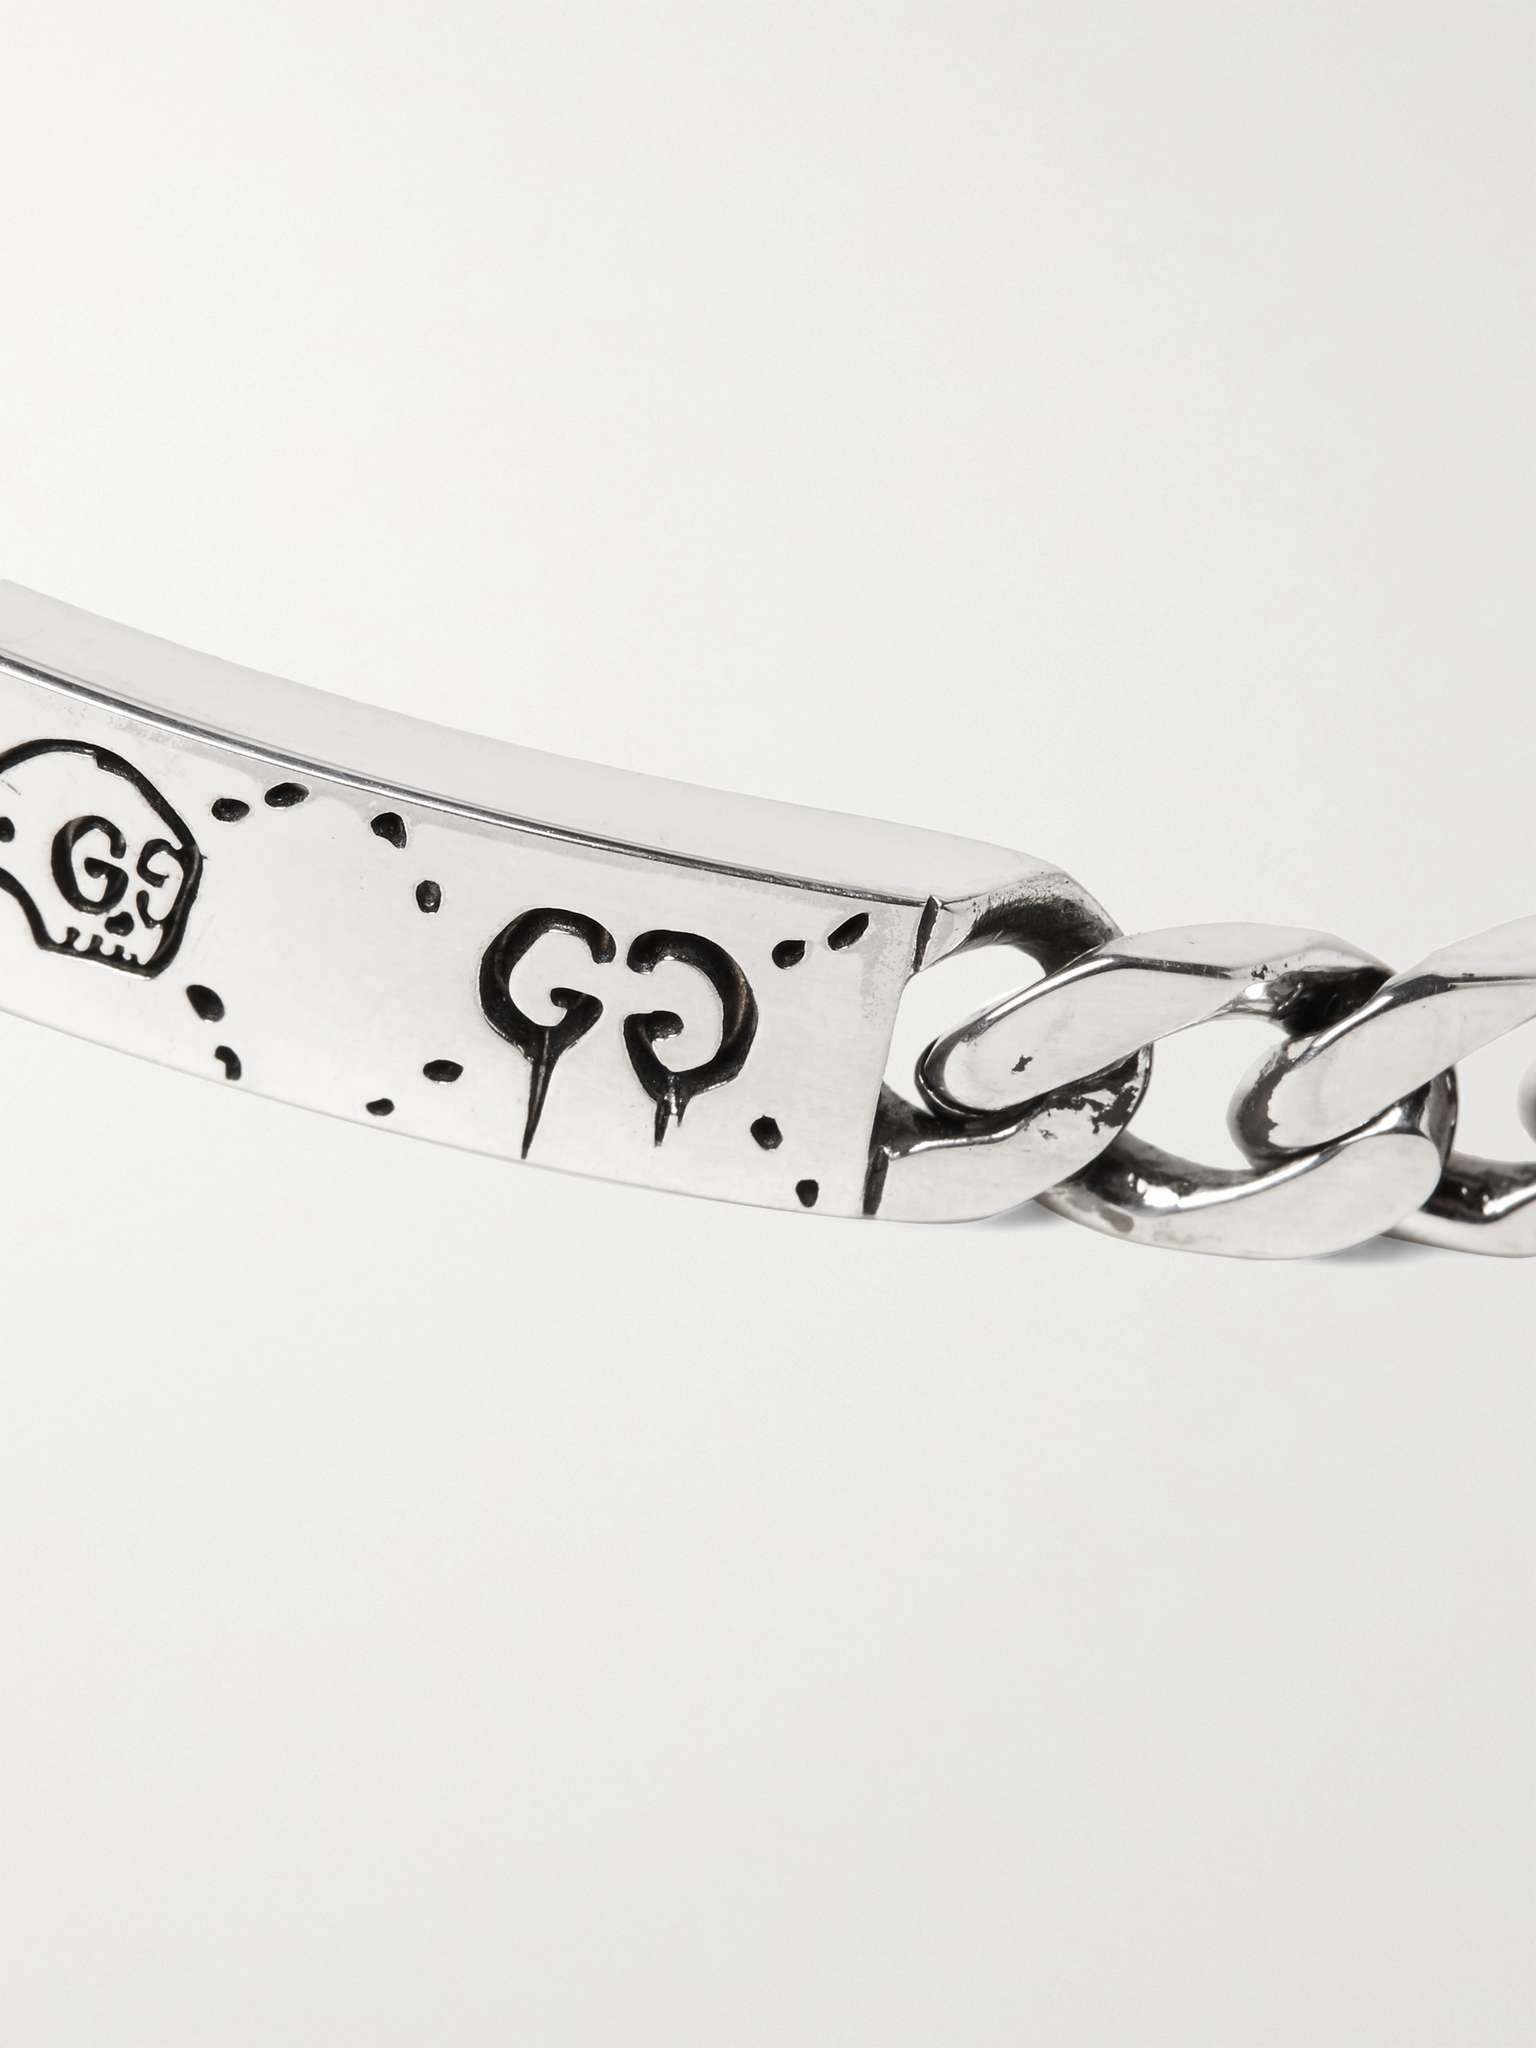 GucciGhost Engraved Sterling Silver ID Bracelet - 4